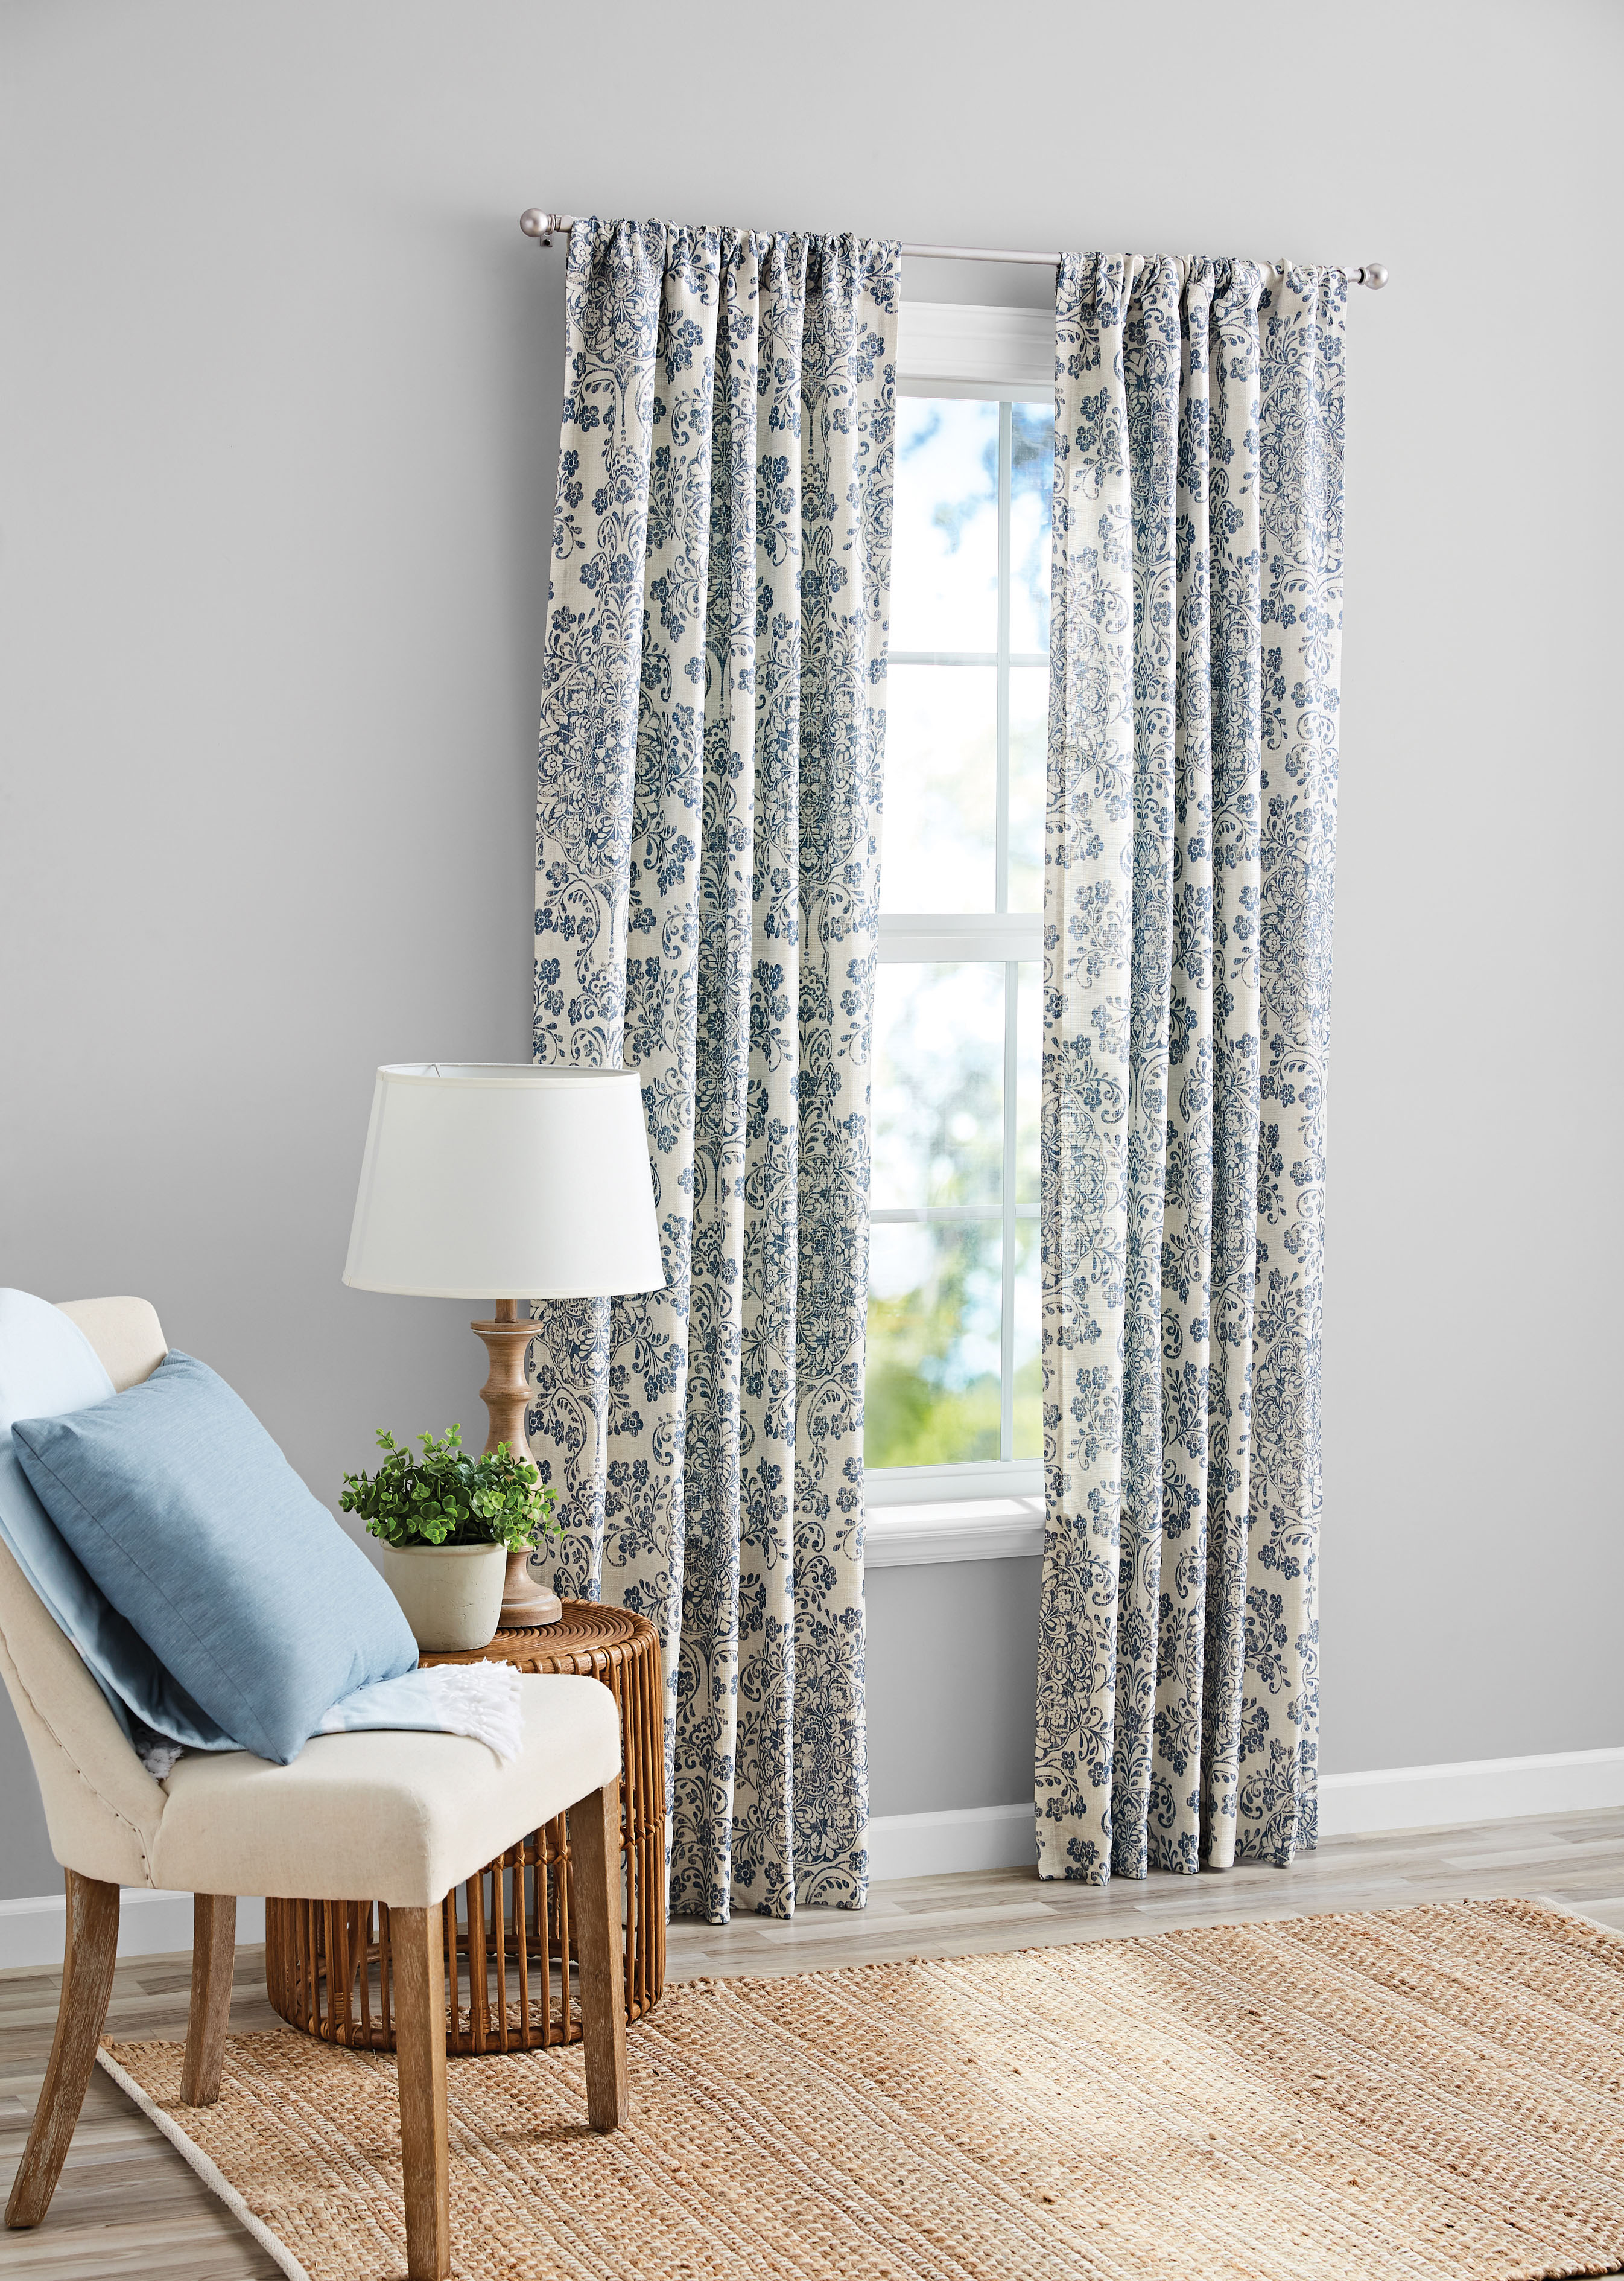 Mainstays Southport Damask Print Light Filtering Rod Pocket Curtain Panel Pair, Set of 2, Blue, 40 x 84 - image 1 of 7